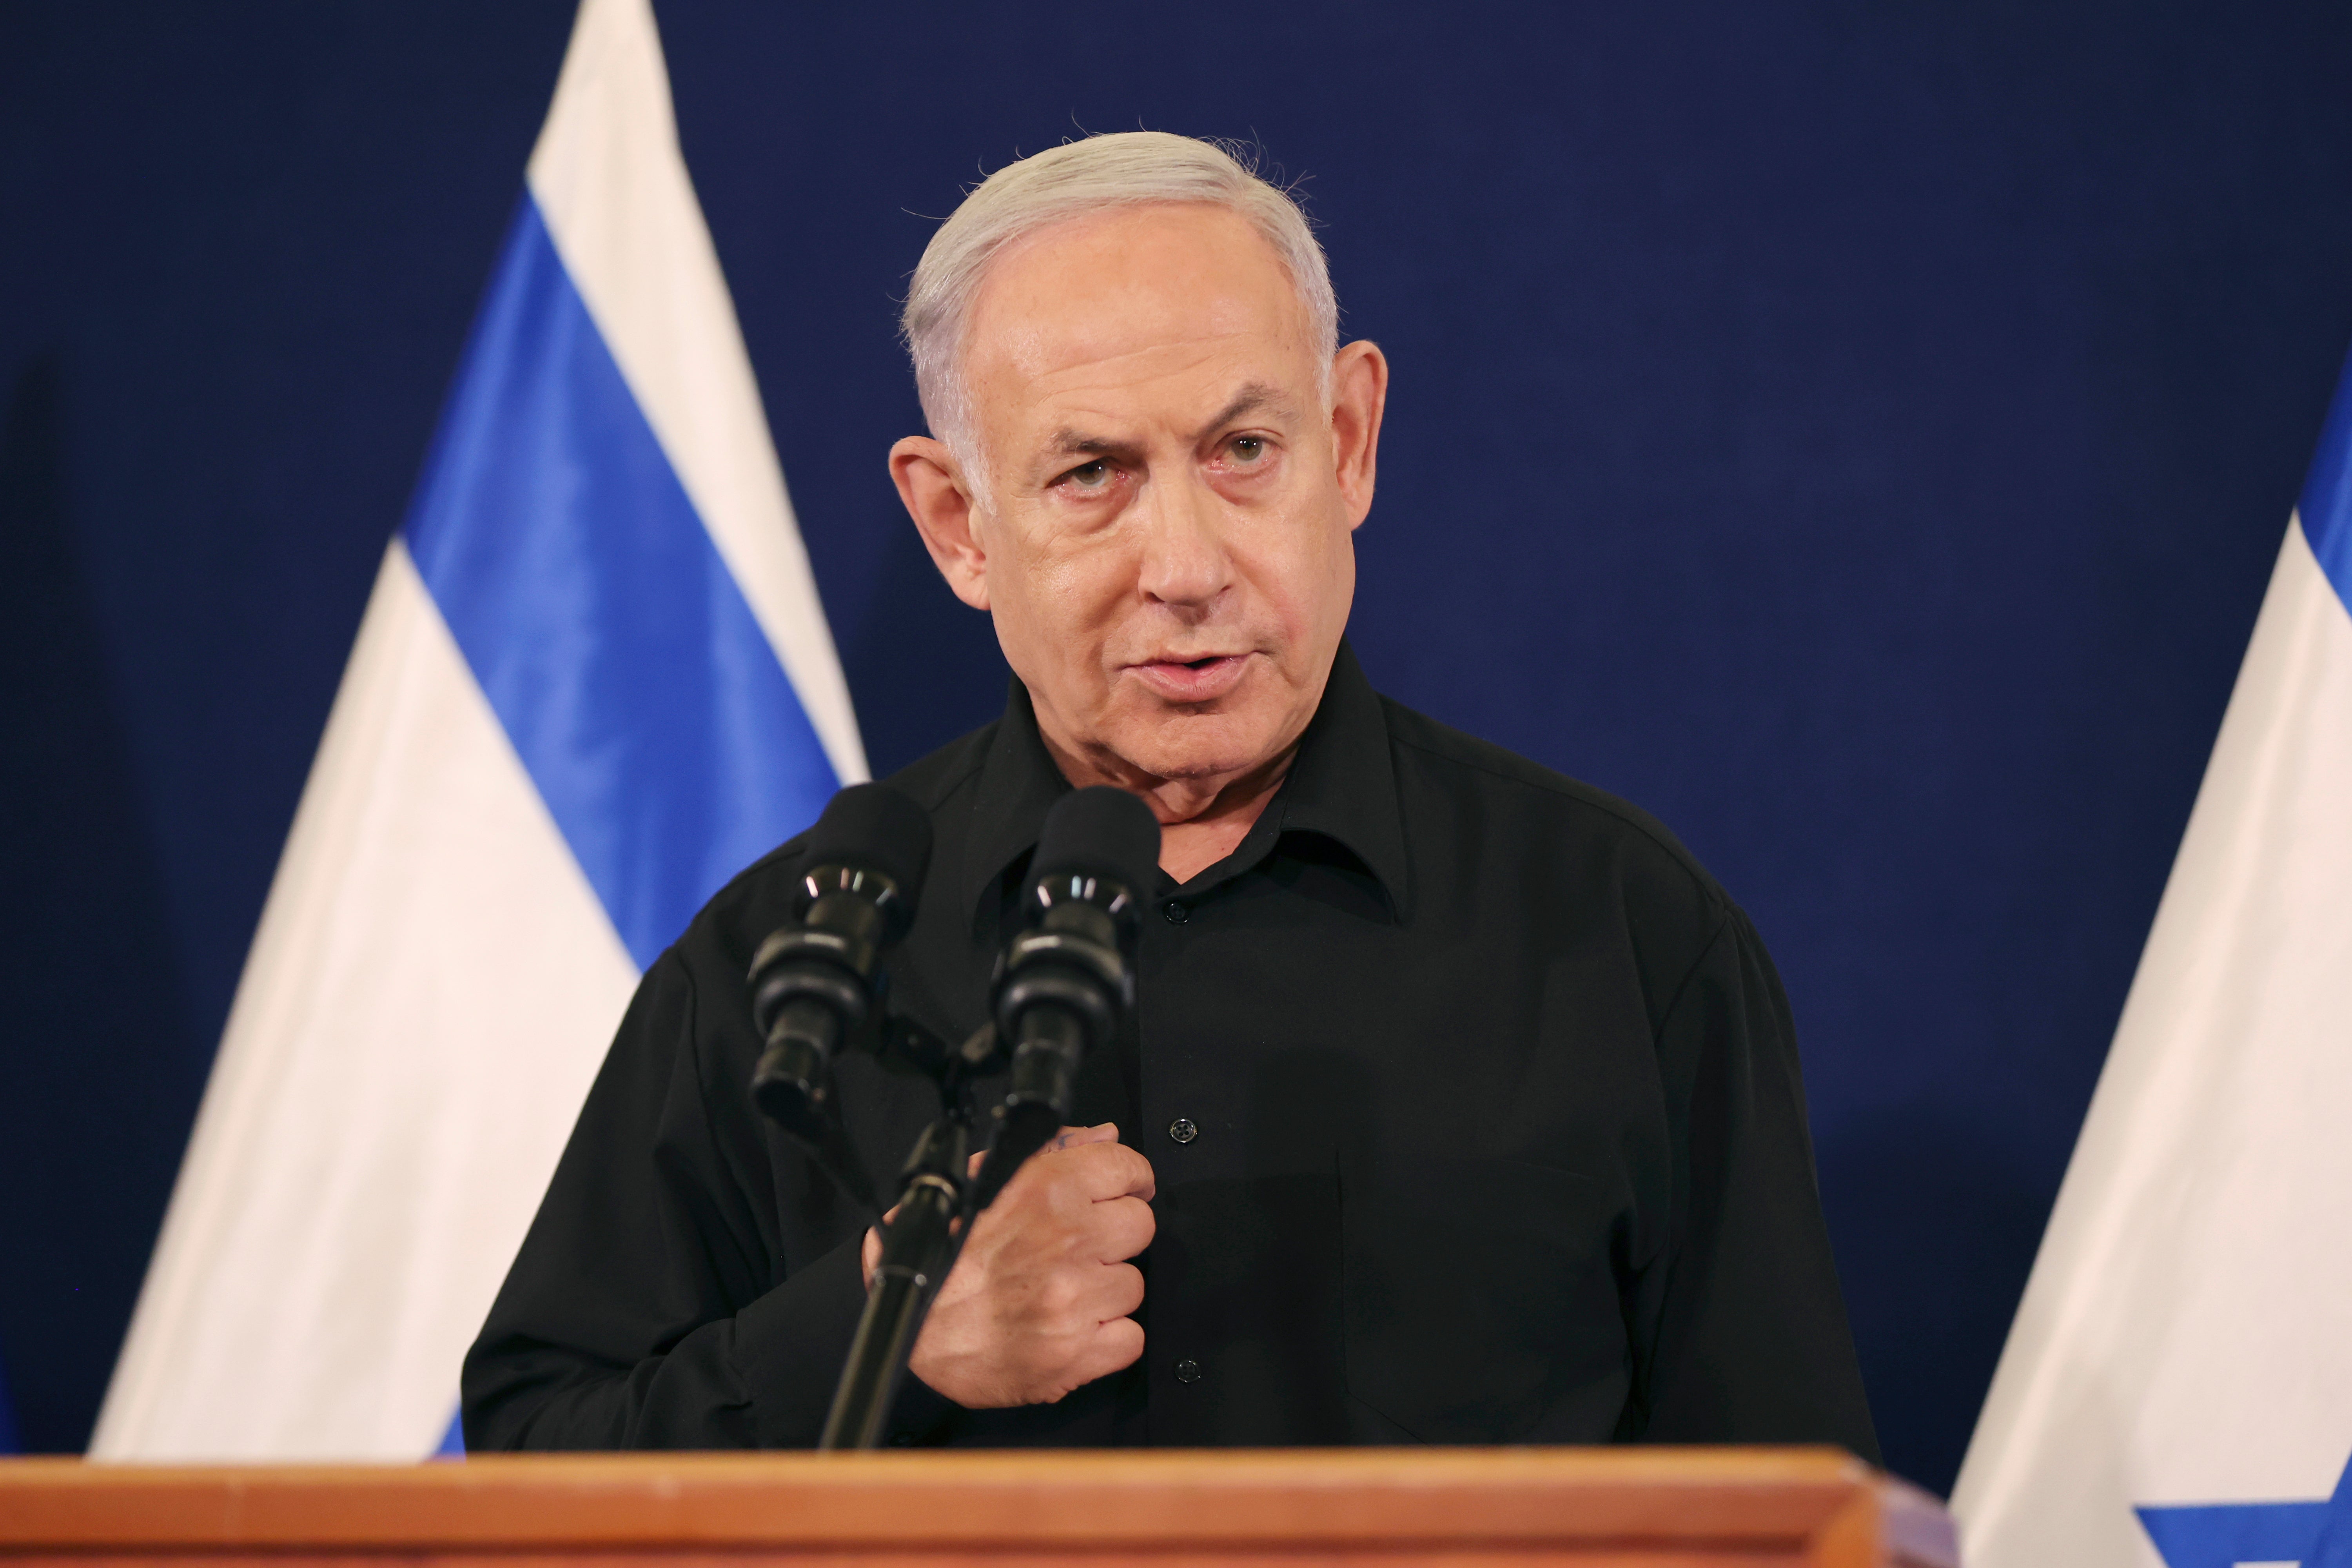 Benjamin Netanyahu said she had been welcomed home with ‘open arms’